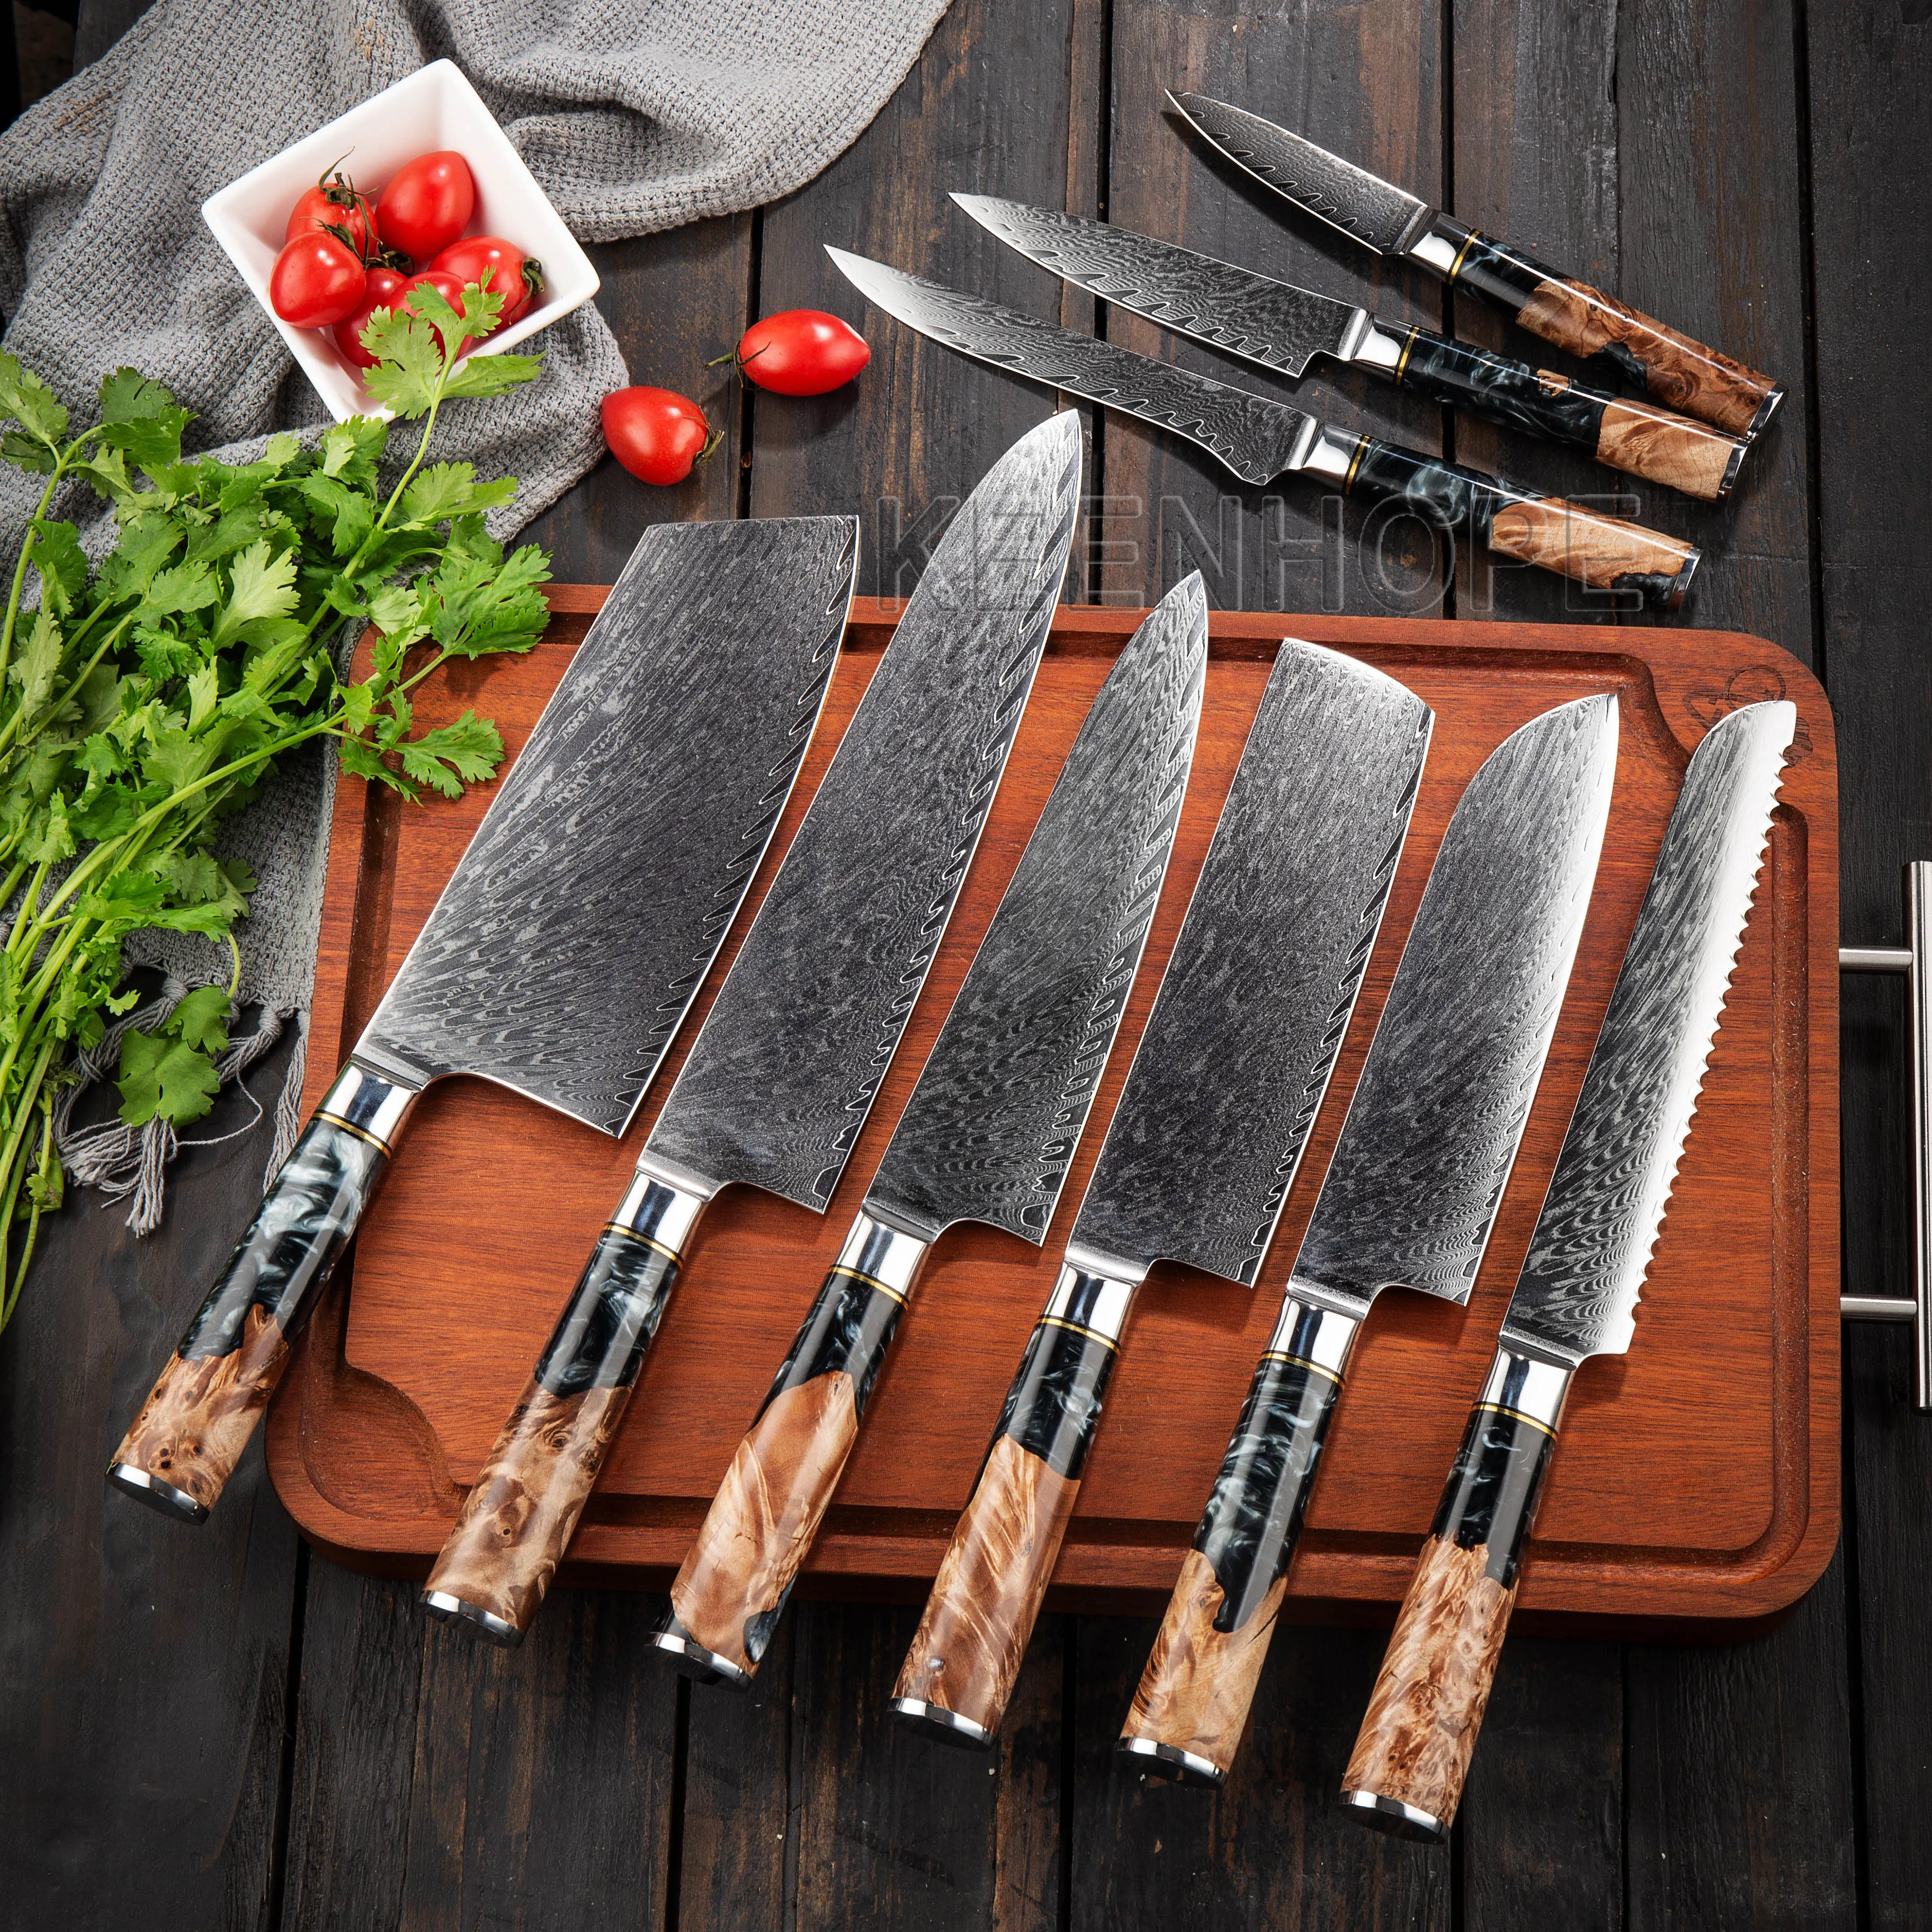 

Kitchen Knives Set with Composited Resin And Maple Burl Wood Handle 9 pcs 67 Layers Damascus VG10 Knife Set